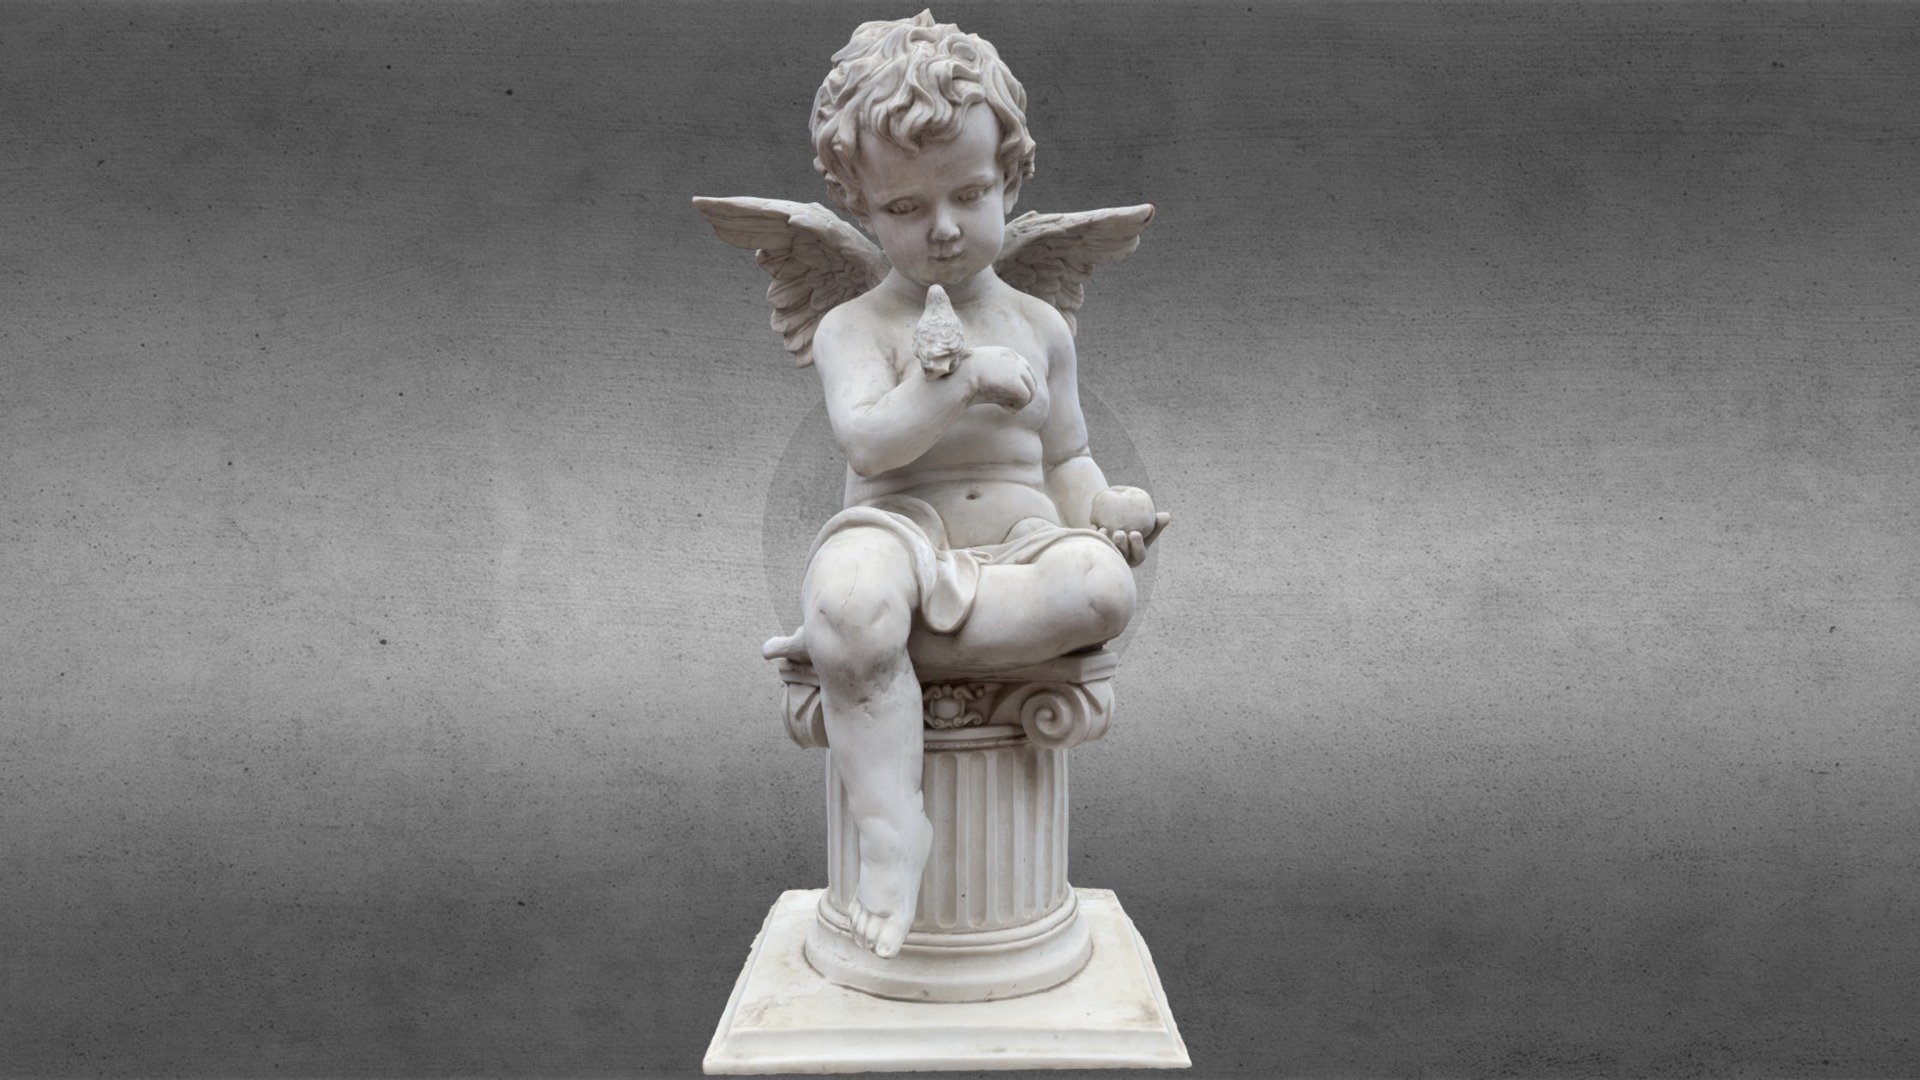 This Baby Angel is a RAW 3D scan and it can be used in games or architectural design. Baby Angel can represent a biblical cherub, mythological cupid, decorative putto, or an angel as a supernatural being in general 3d model